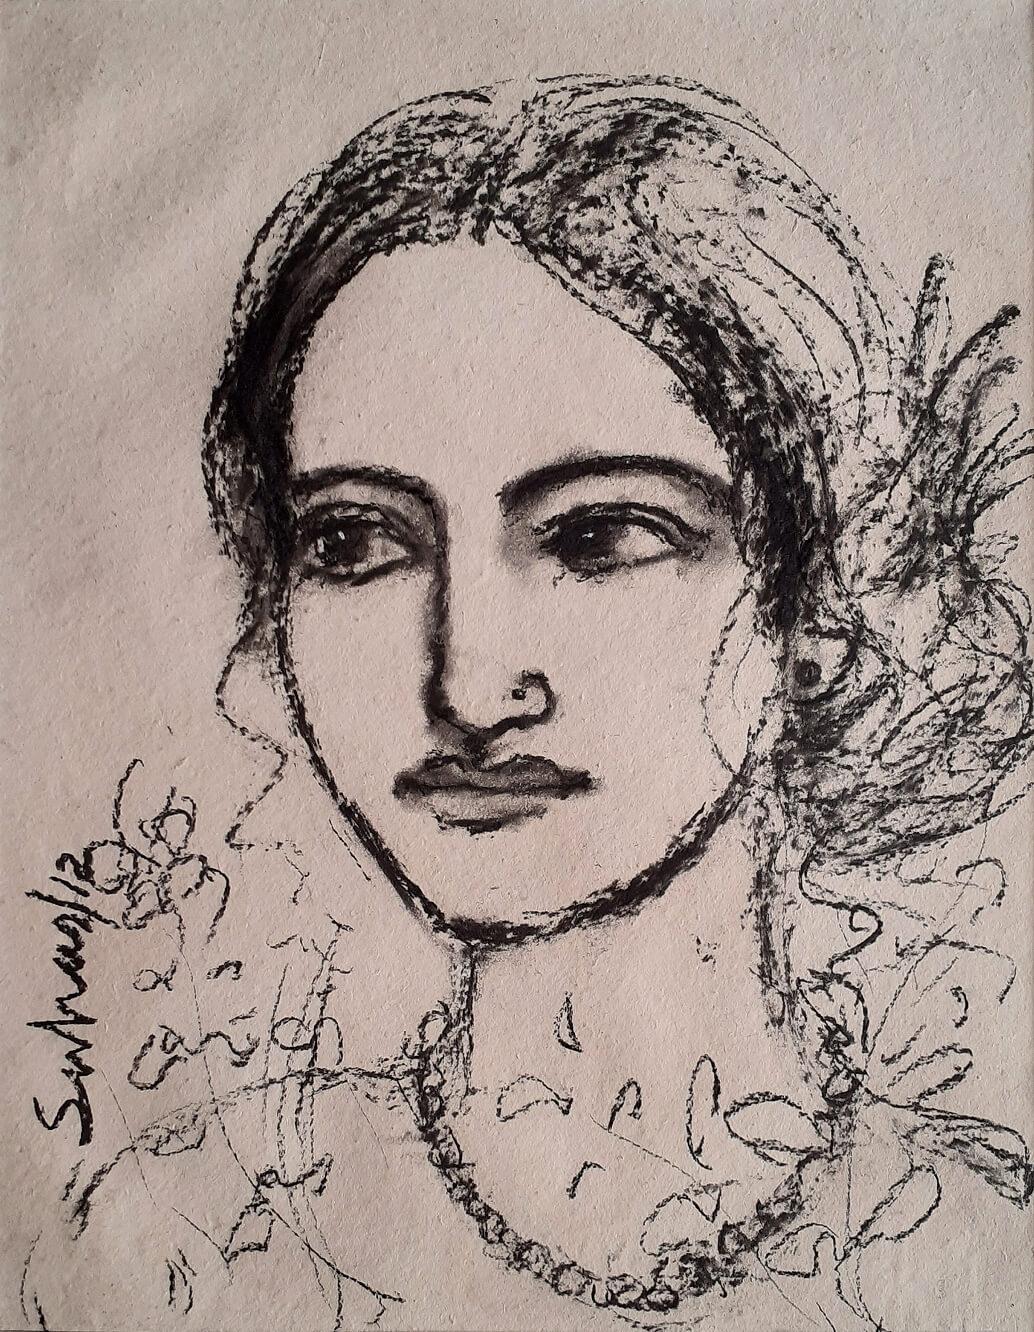 Suhas Roy - Radha - 20.6 x 16 inches ( unframed size)  
Charcoal on Paper , 2012
* * FRAMED AND READY TO HANG DOOR DELIVERED IN INDIA
* * UNFRAMED AND DOOR DELIVERED INTERNATIONALLY

Suhas Roy 's mystic woman which he calls 'Radha', either Oil on